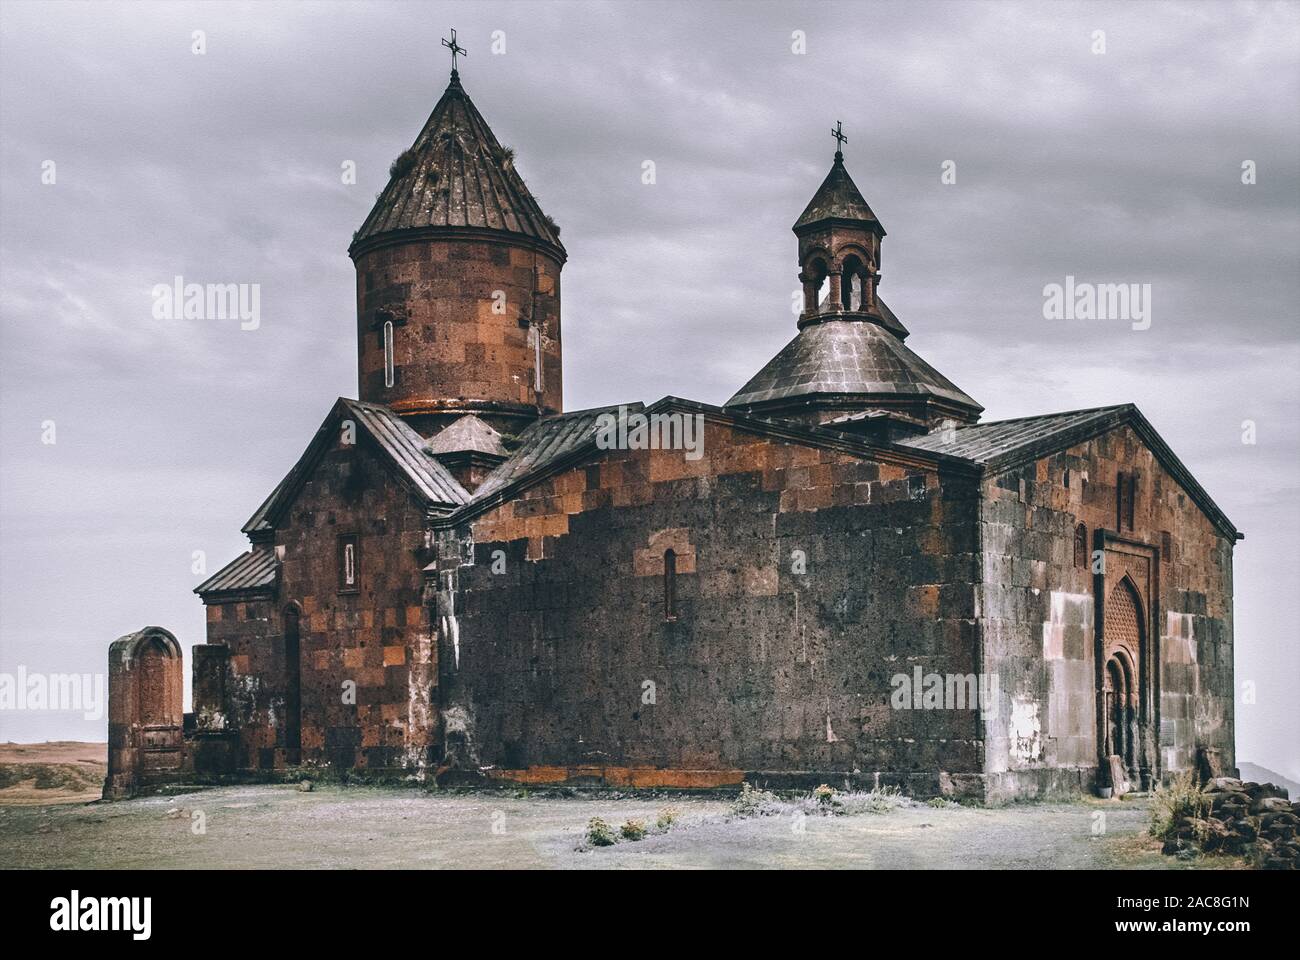 Saghmosavank (Monastery of Psalms)is a 13th-century monastic complex located in the village of Saghmosavan in the Aragatsotn Province of Armenia Stock Photo